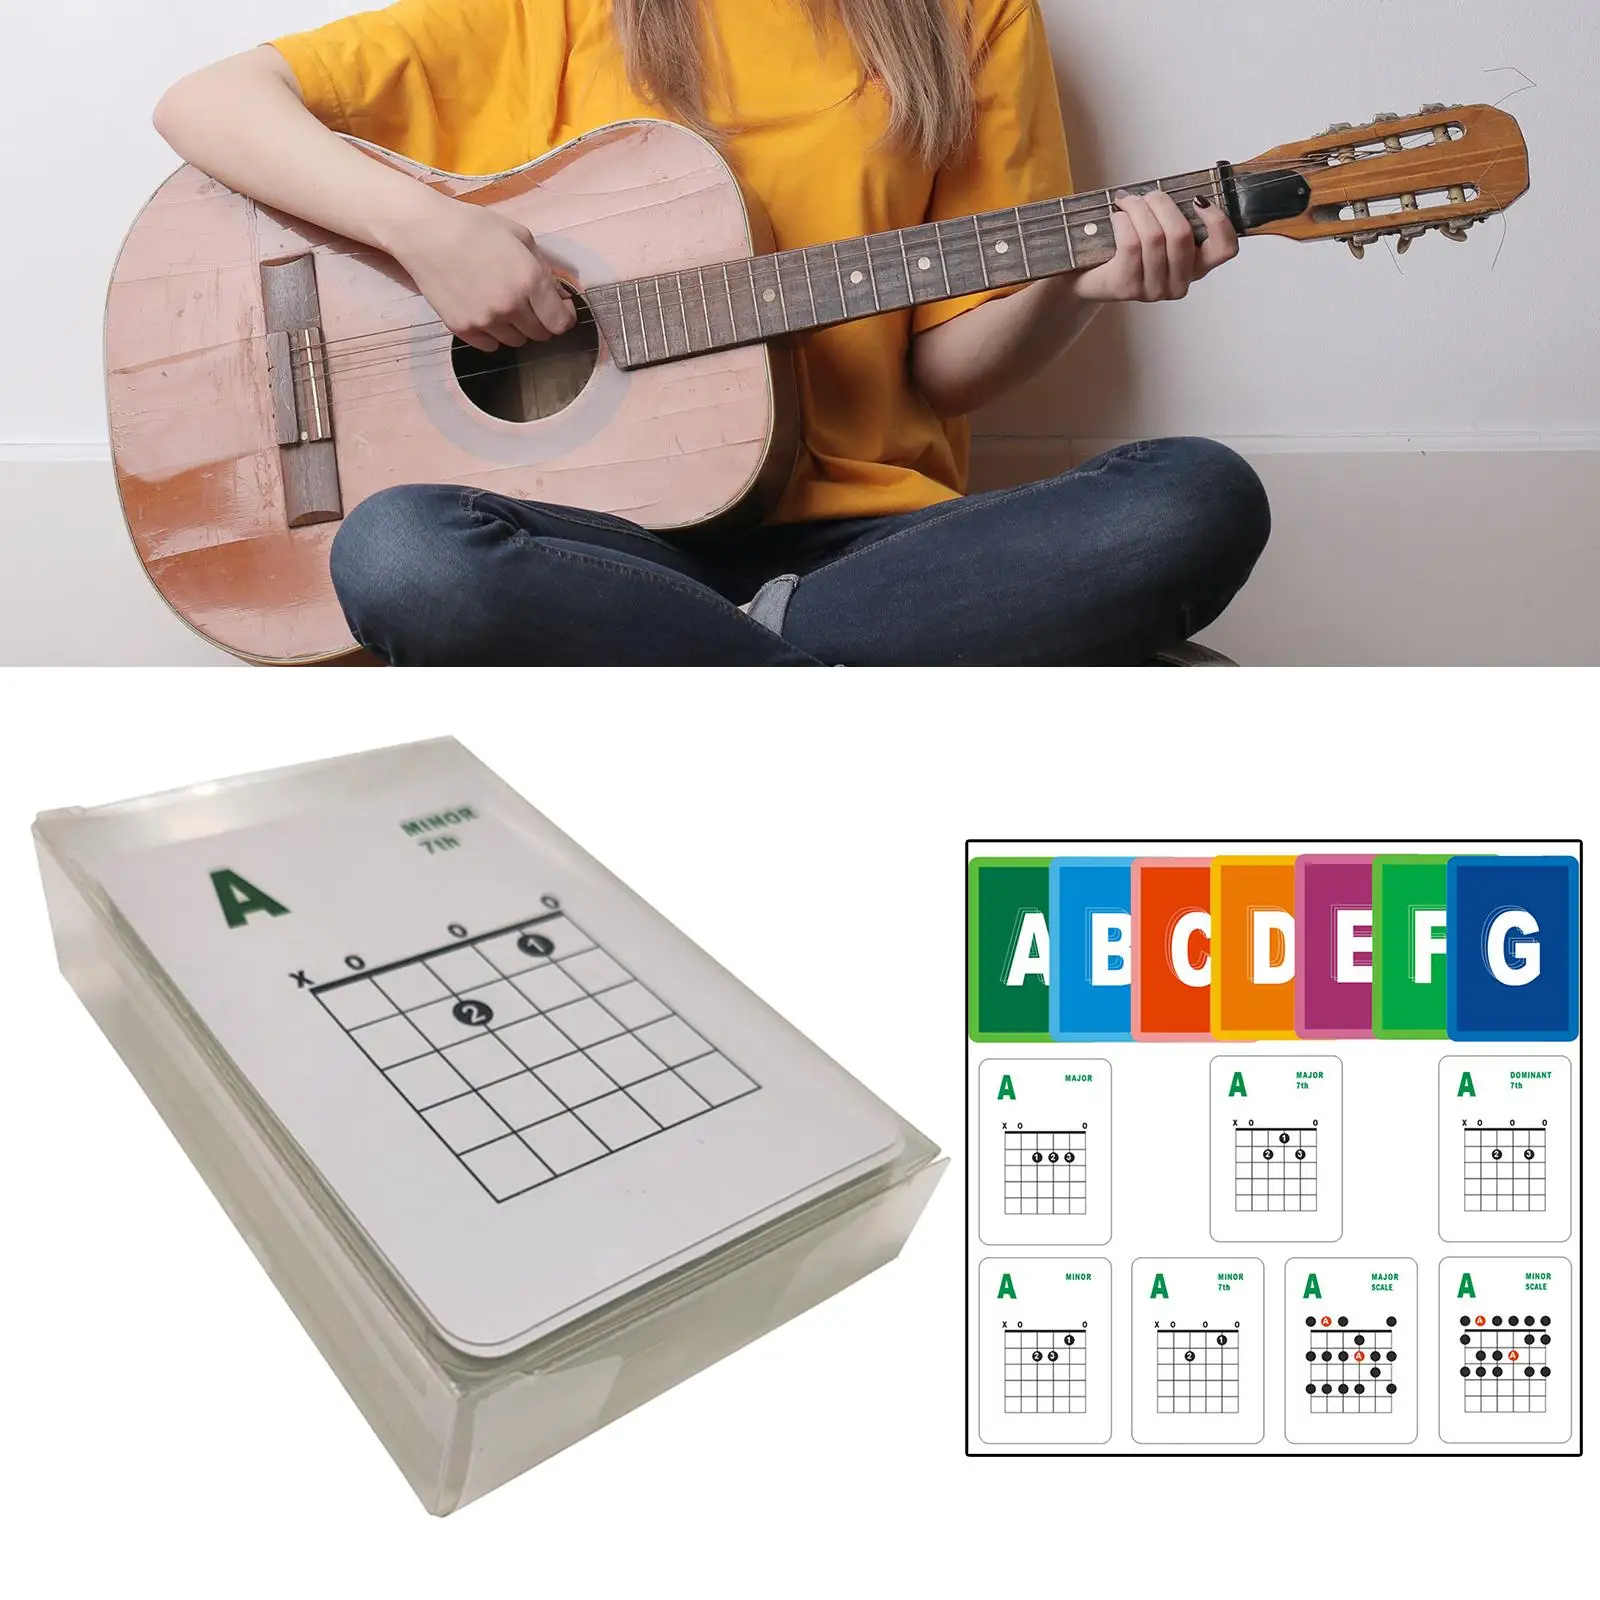 49x Guitar Chords Cards A toG Scale Learning Cards for Guitarists Learn Practice